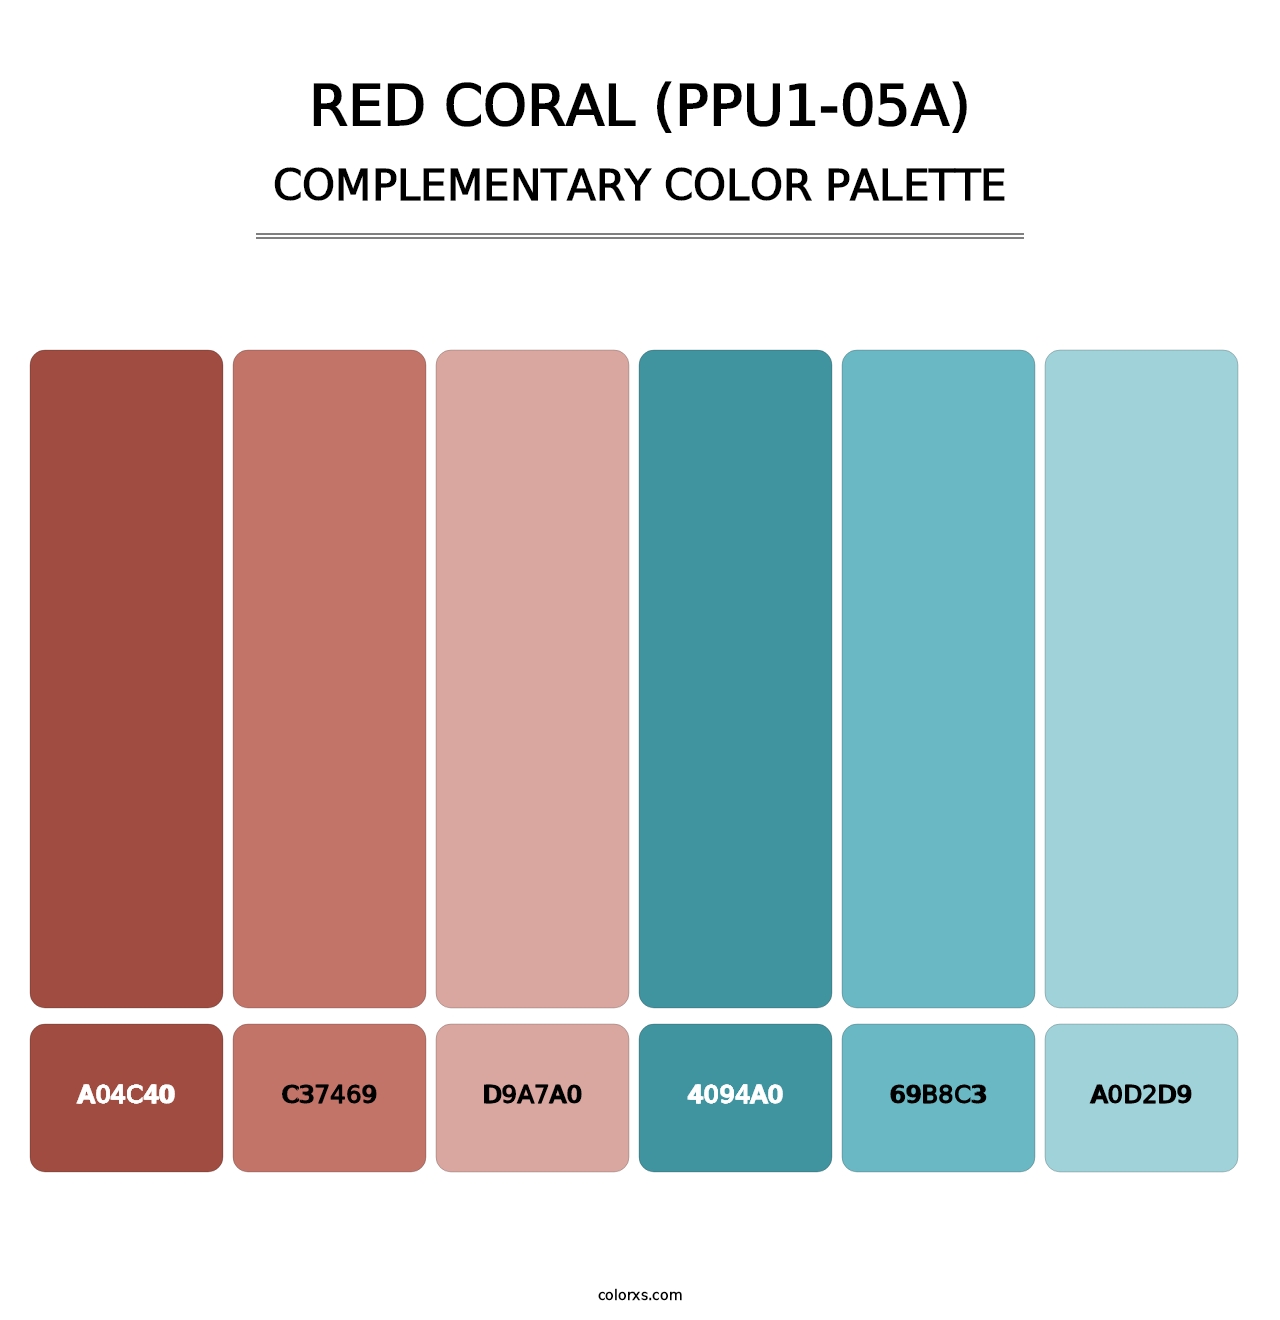 Red Coral (PPU1-05A) - Complementary Color Palette